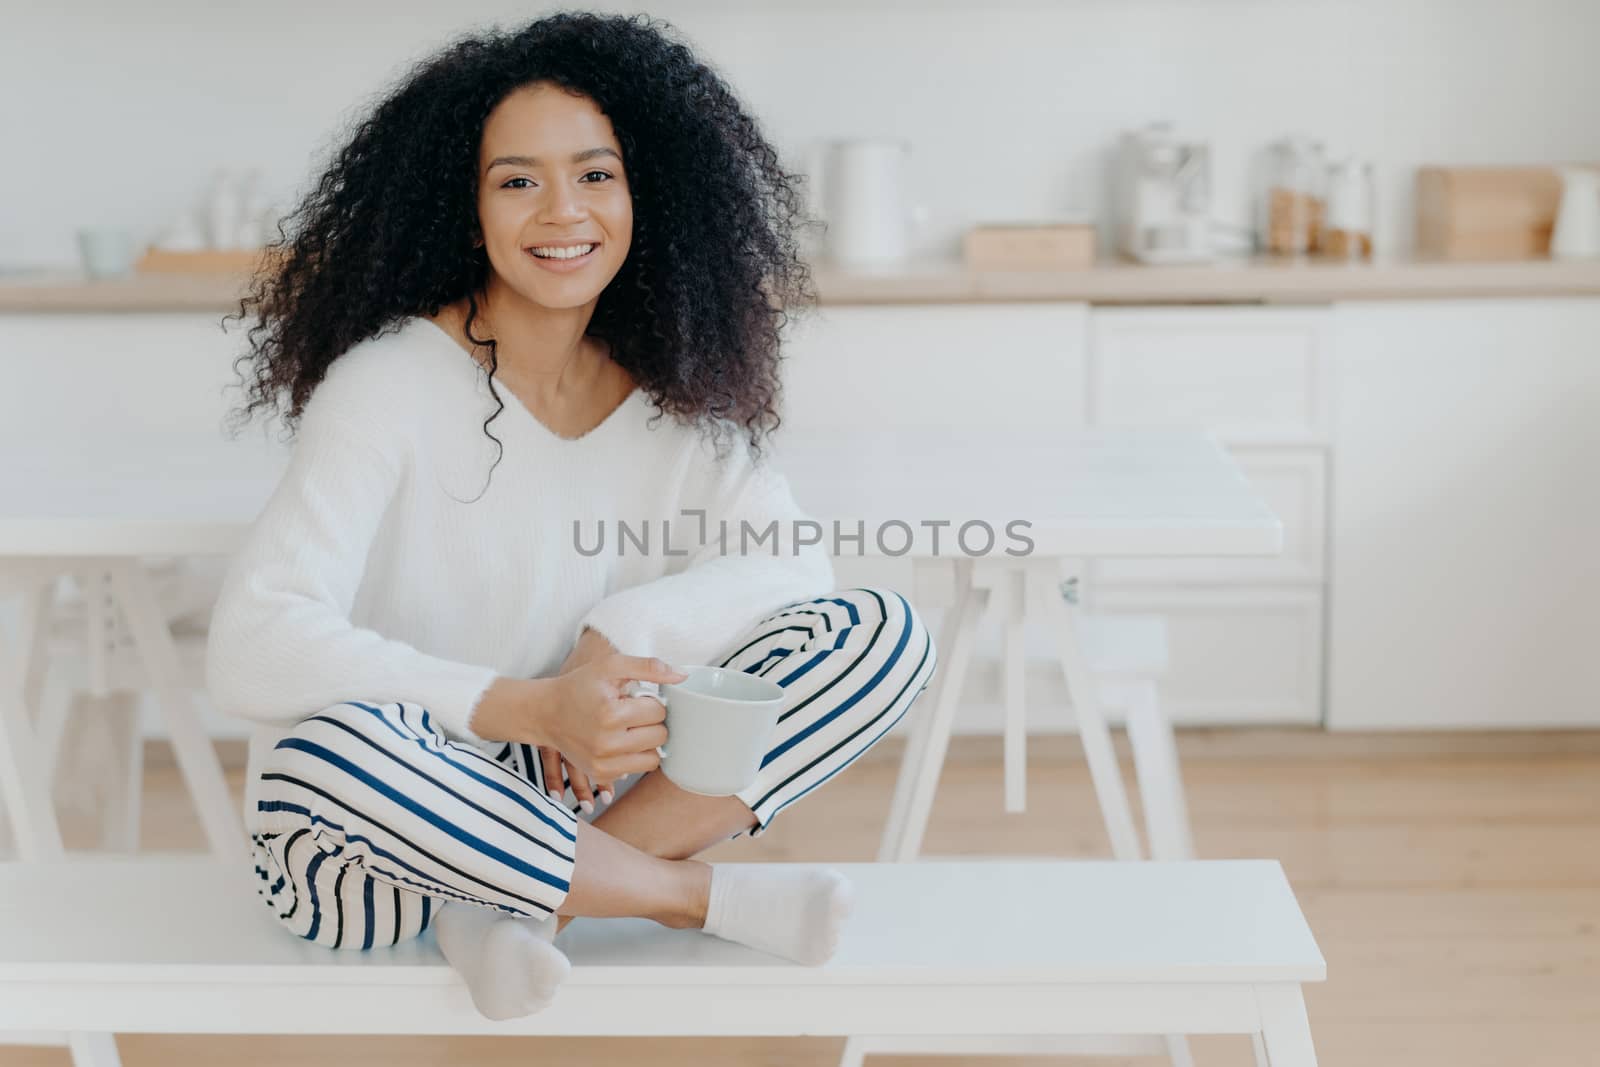 Smiling relaxed African American female sits crossed legs on bench against kitchen interior, wears white sweater and striped pants, drinks hot beverage, enjoys domestic atmosphere. Coffee time